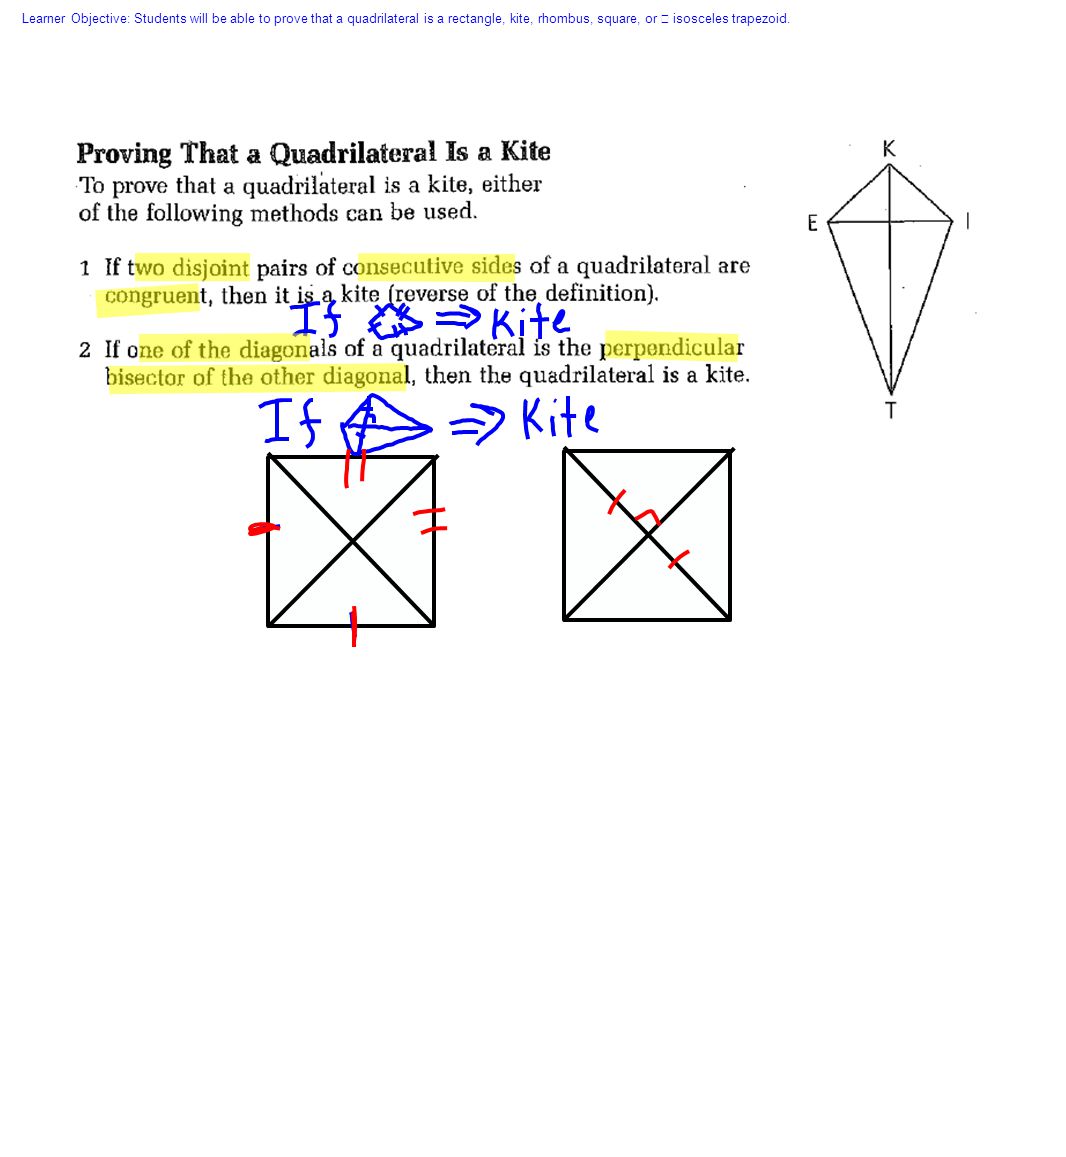 Learner Objective: Students will be able to prove that a quadrilateral is a rectangle, kite, rhombus, square, or isosceles trapezoid.